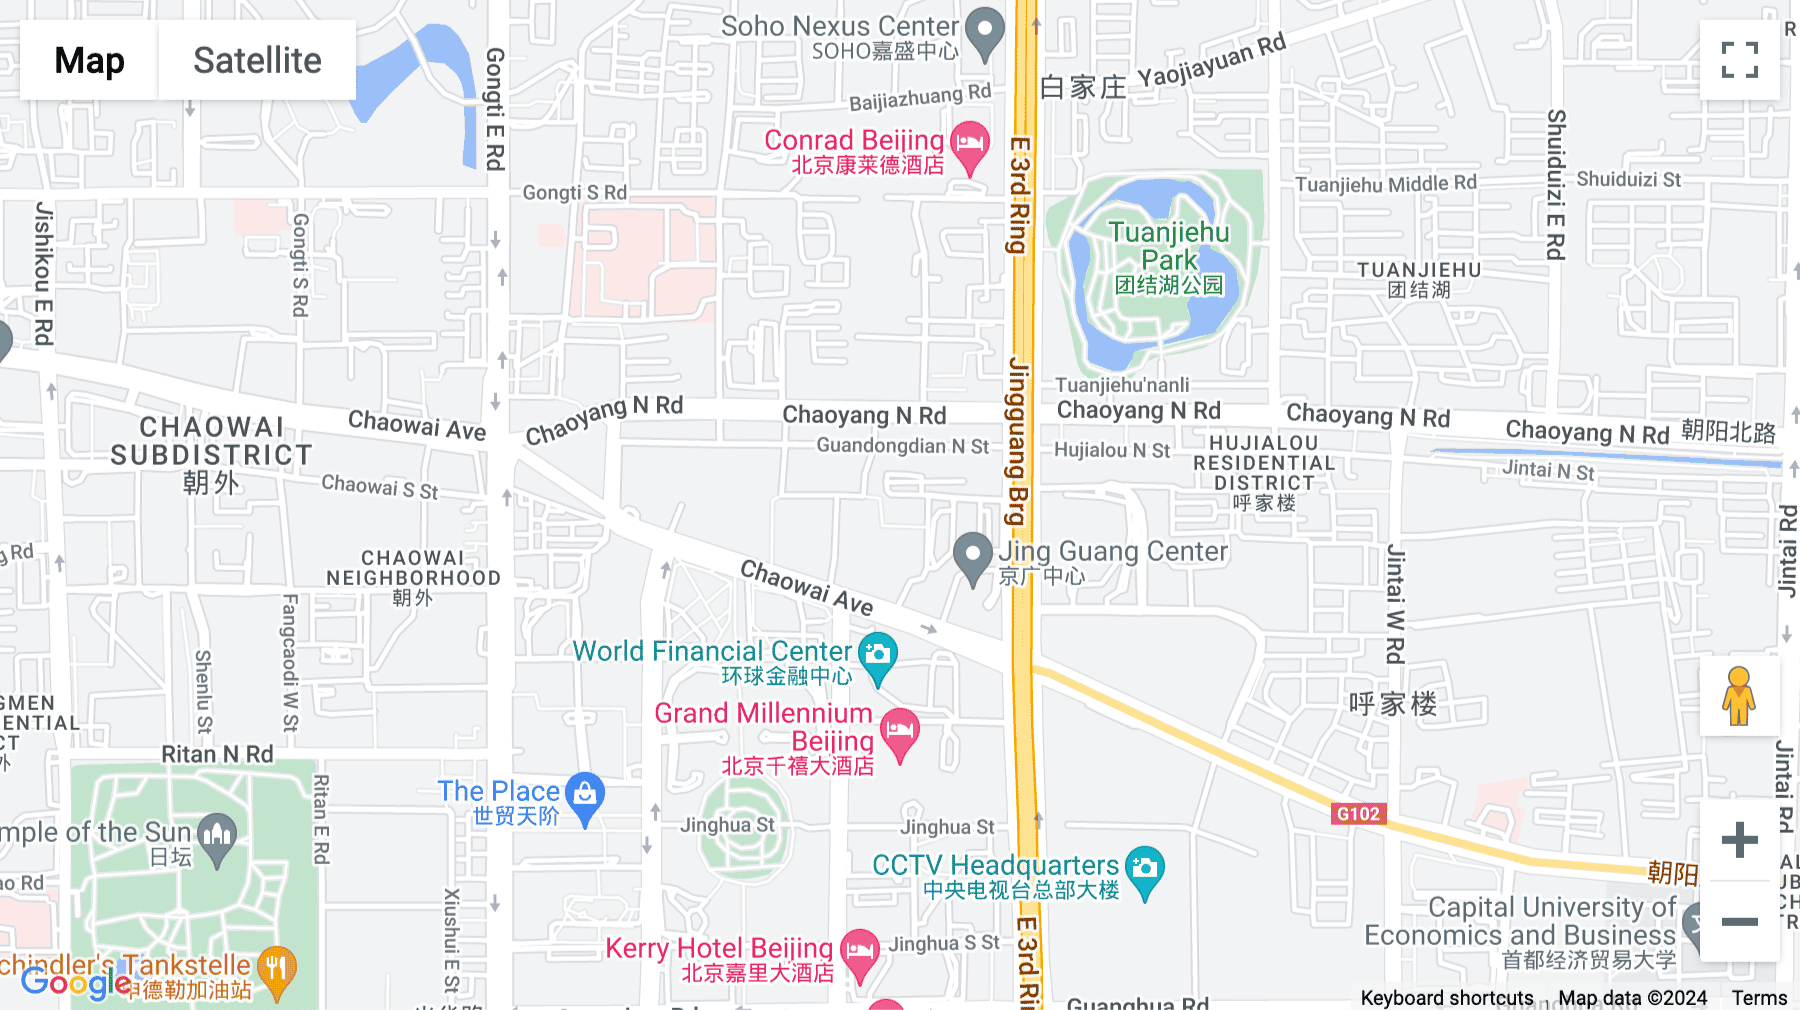 Click for interative map of Jia 19 East 3rd Ring North Road, Soho Nexus Center, 10th Floor, Beijing